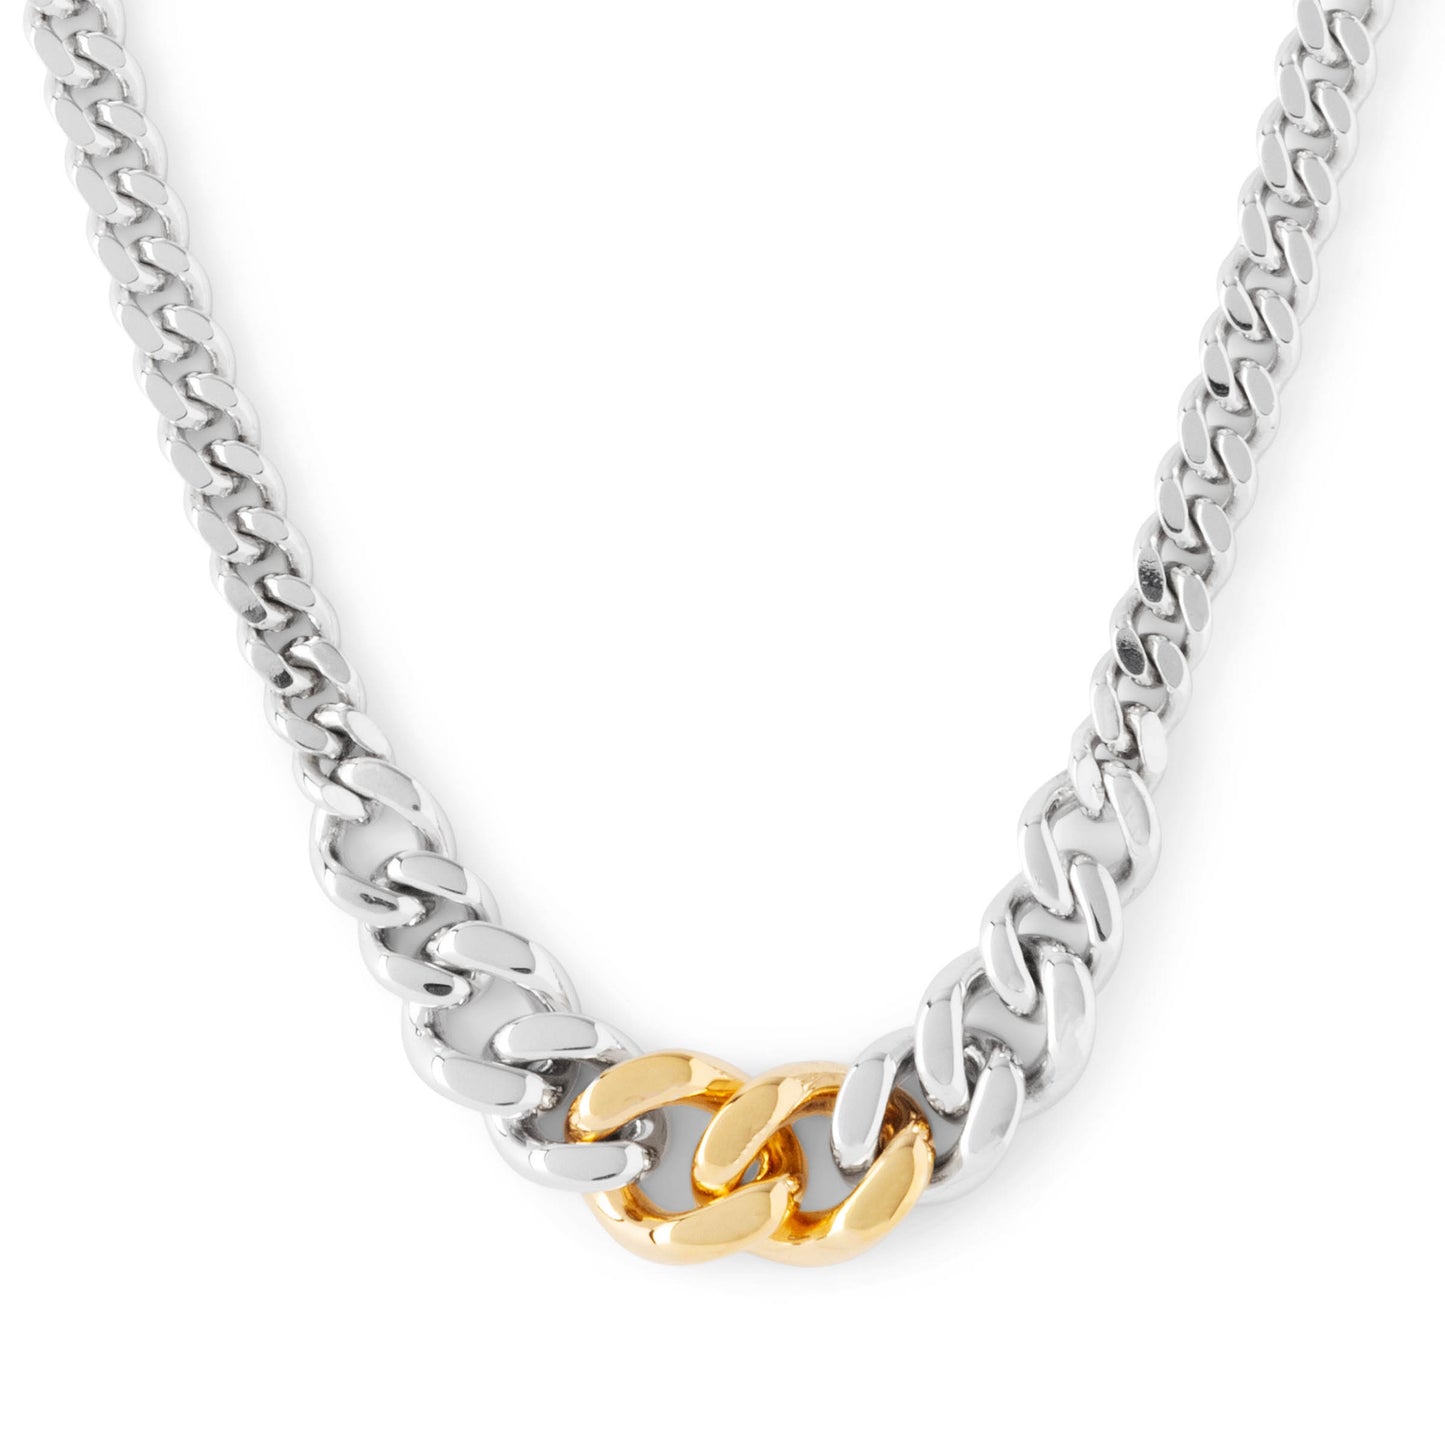  TOM WOOD DEAN CHAIN DUO 925 STERLING SILVER/18K GOLD PLATED 